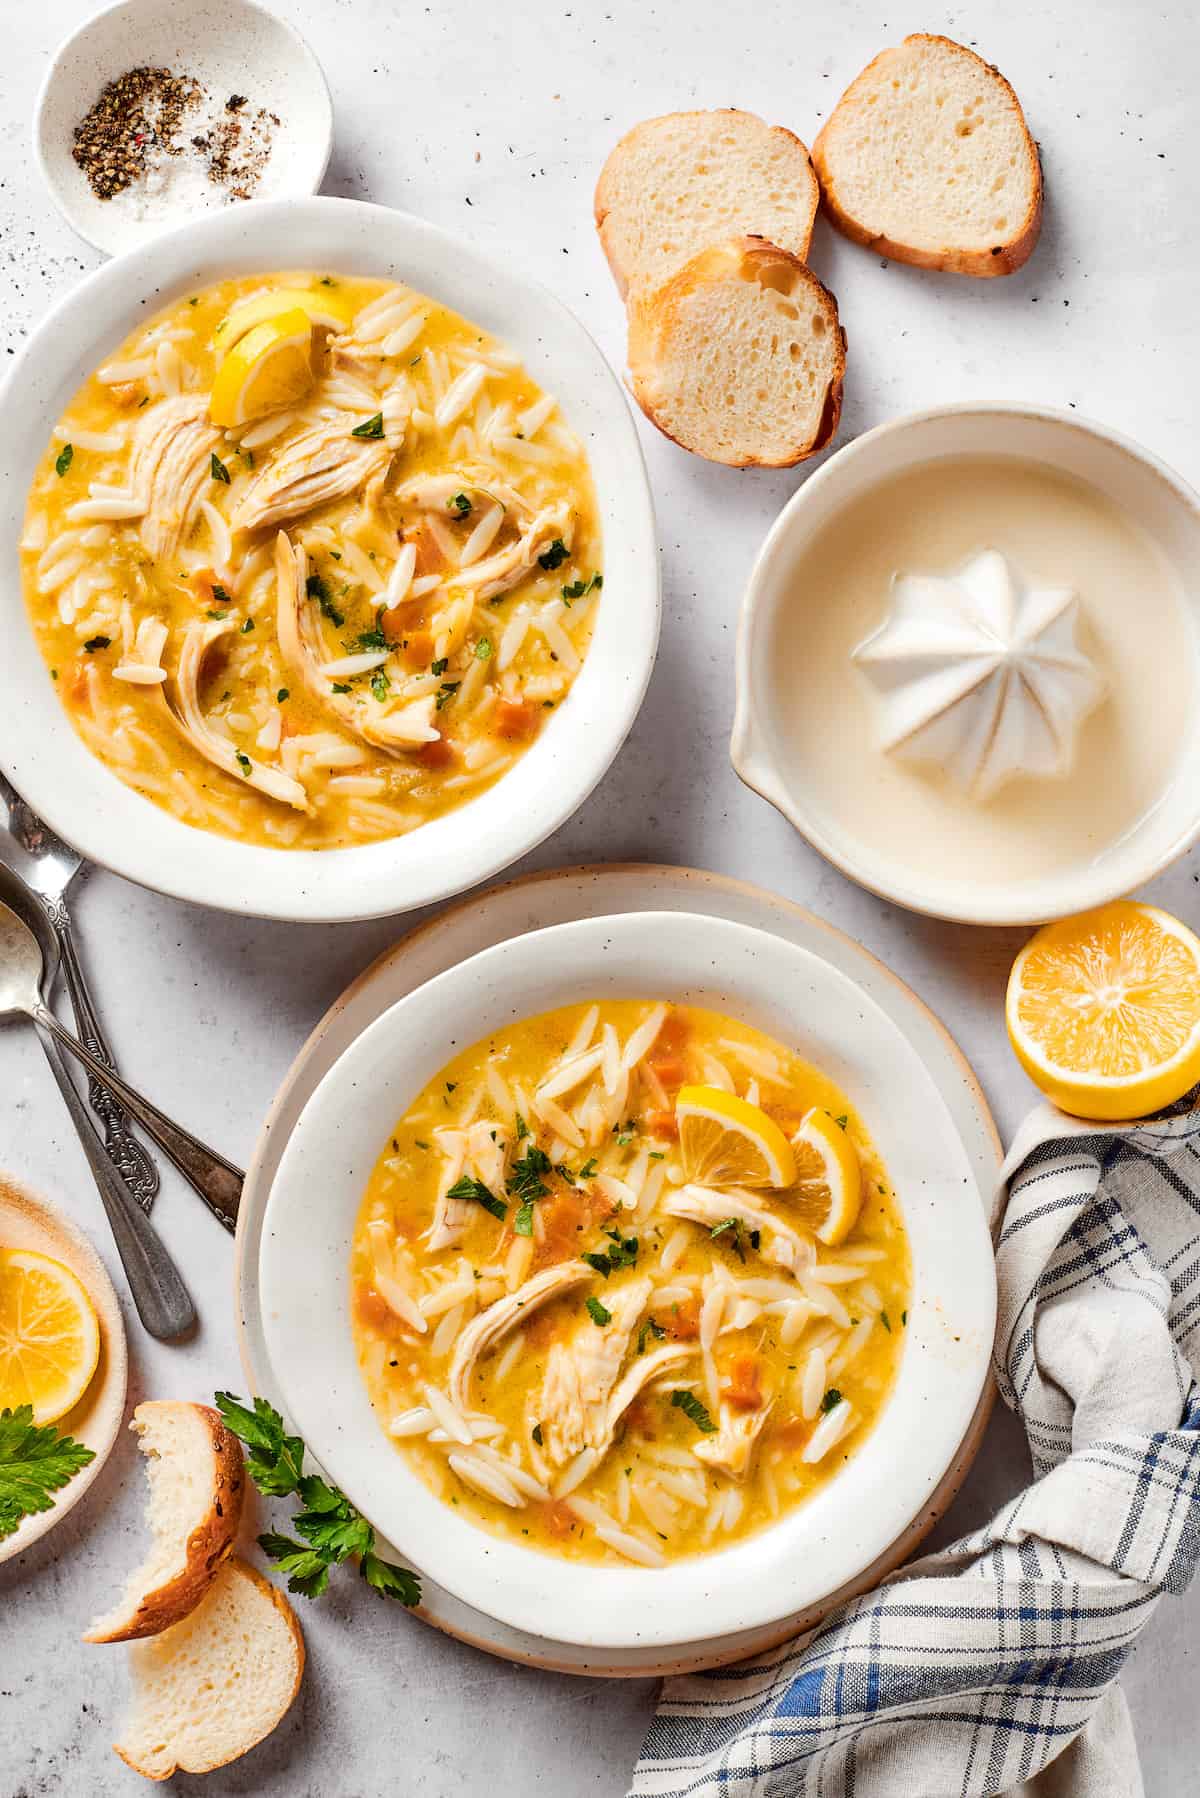 Bowls of lemon chicken orzo soup on a table with a juicer and lemon halves nearby.